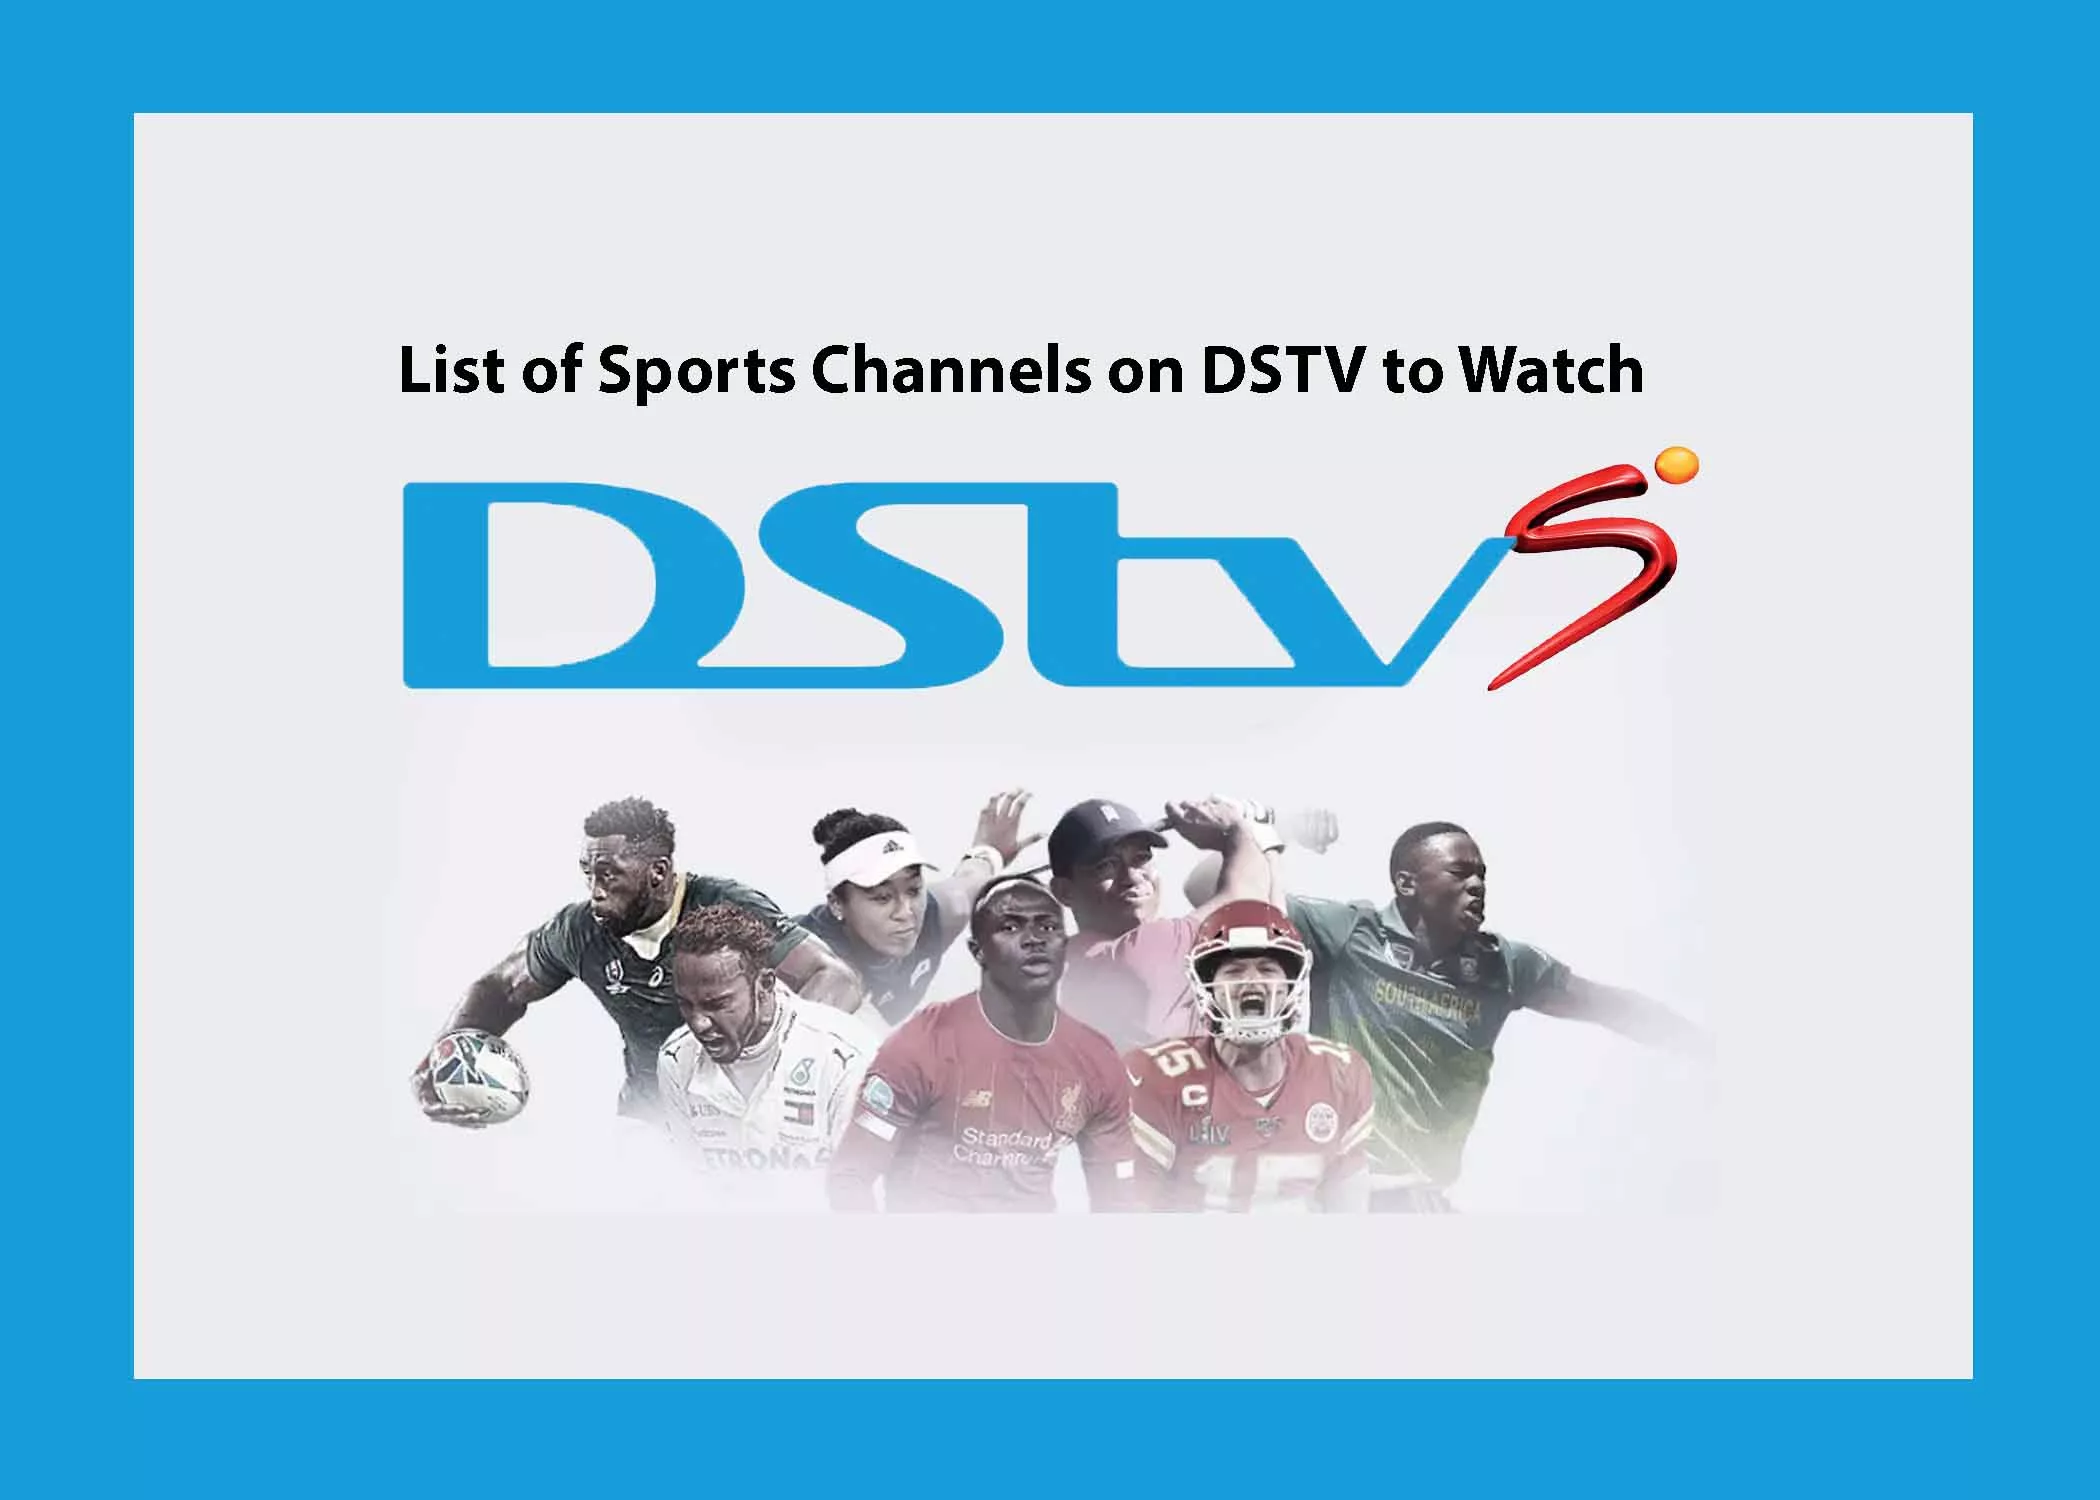 List of Sports Channels on DSTV to Watch